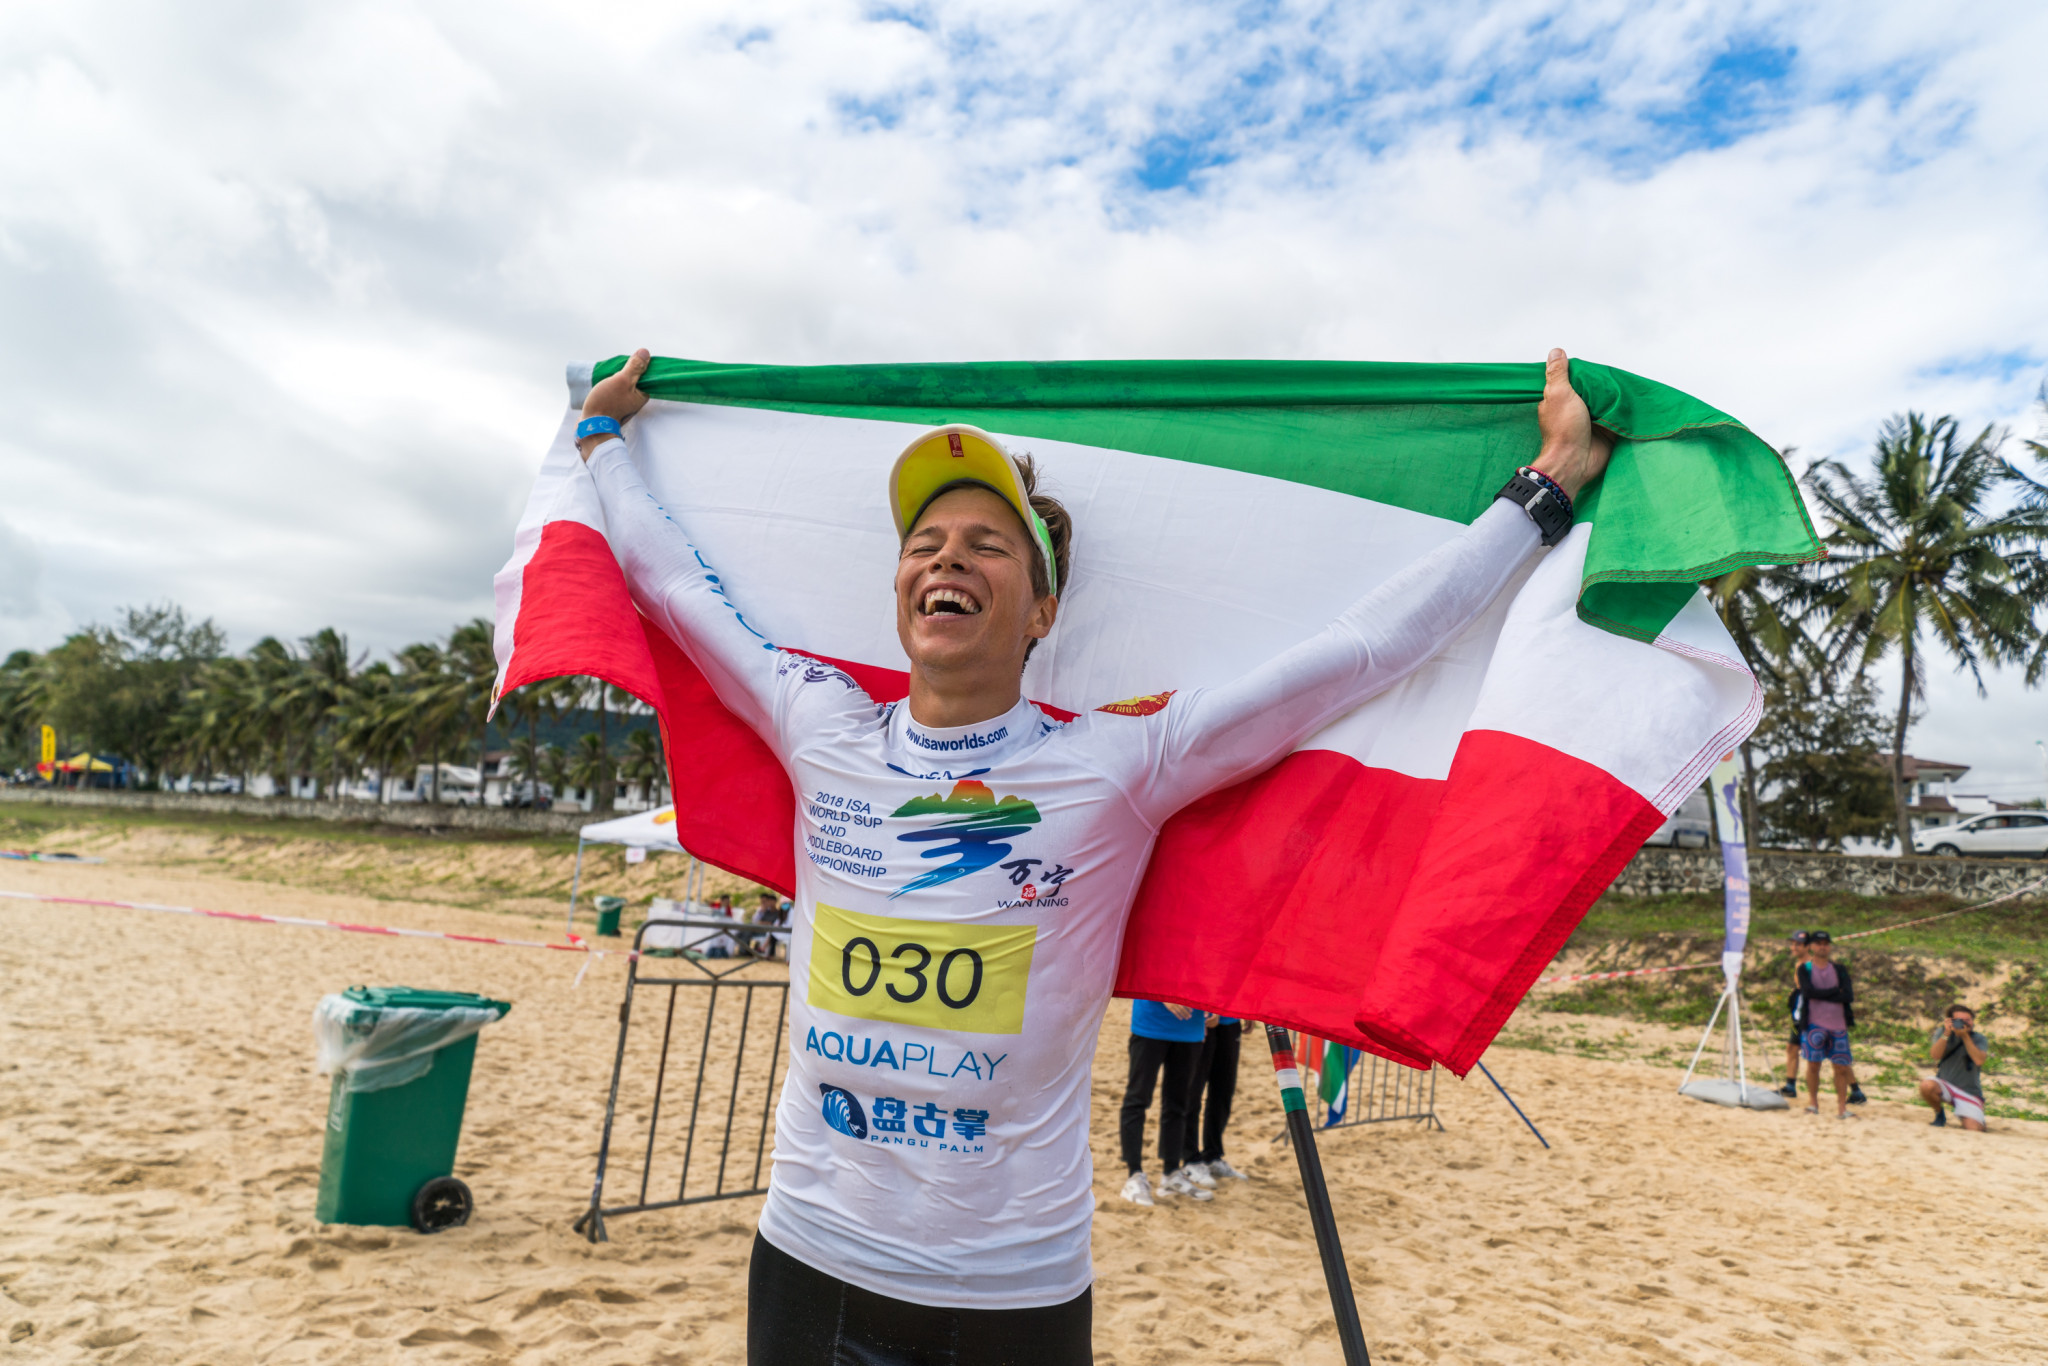 Gold for Hungary and United States on day six of ISA World SUP and Paddleboard Championship